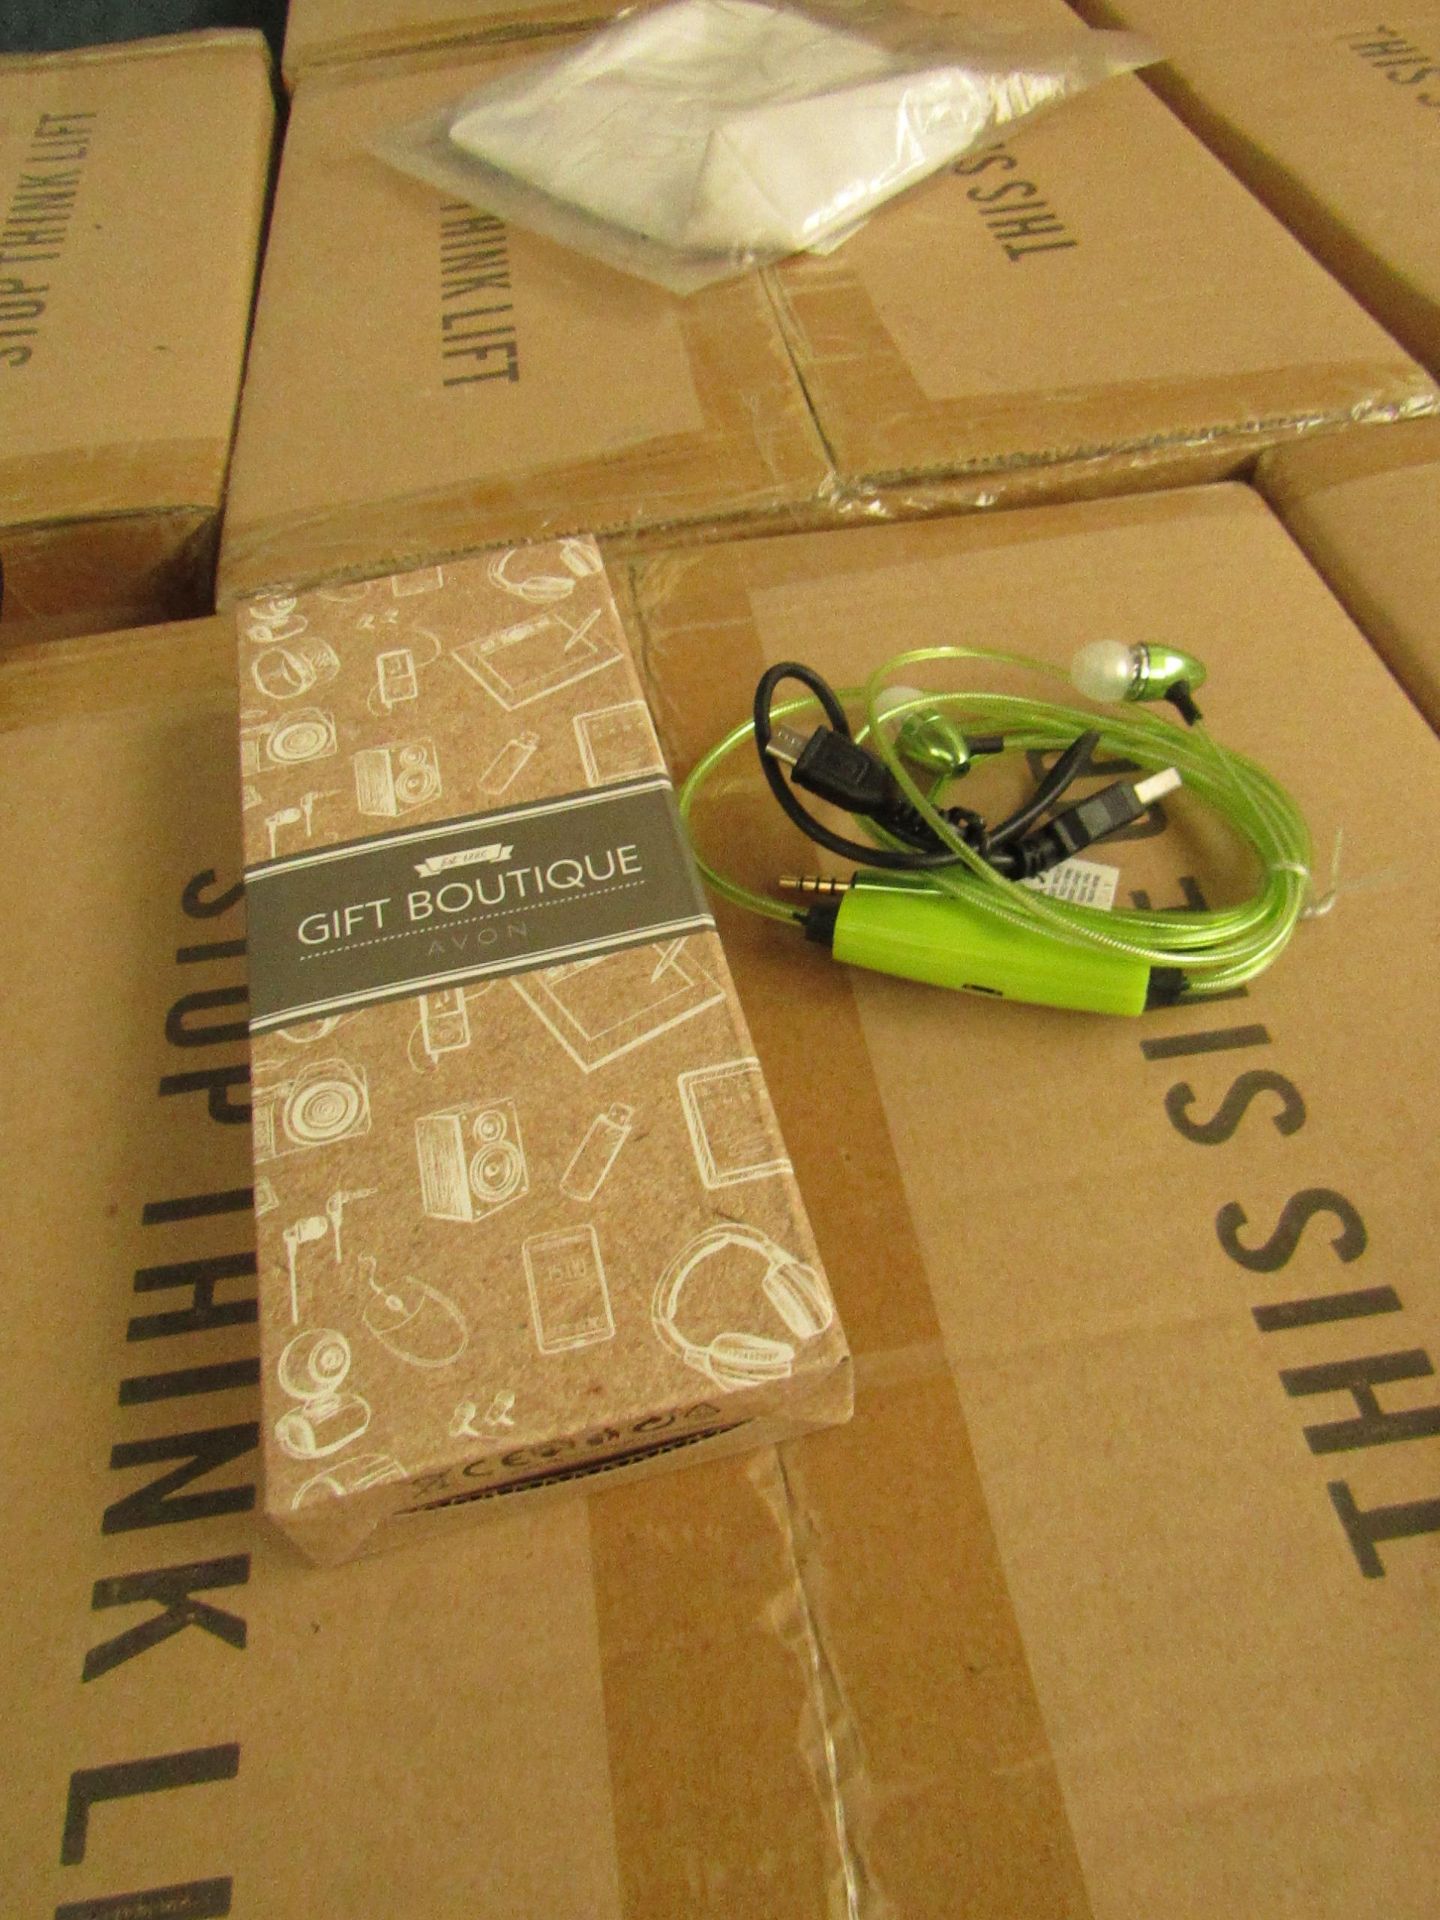 4x Gift Boutique, Light up Earphones -Unused & Boxed